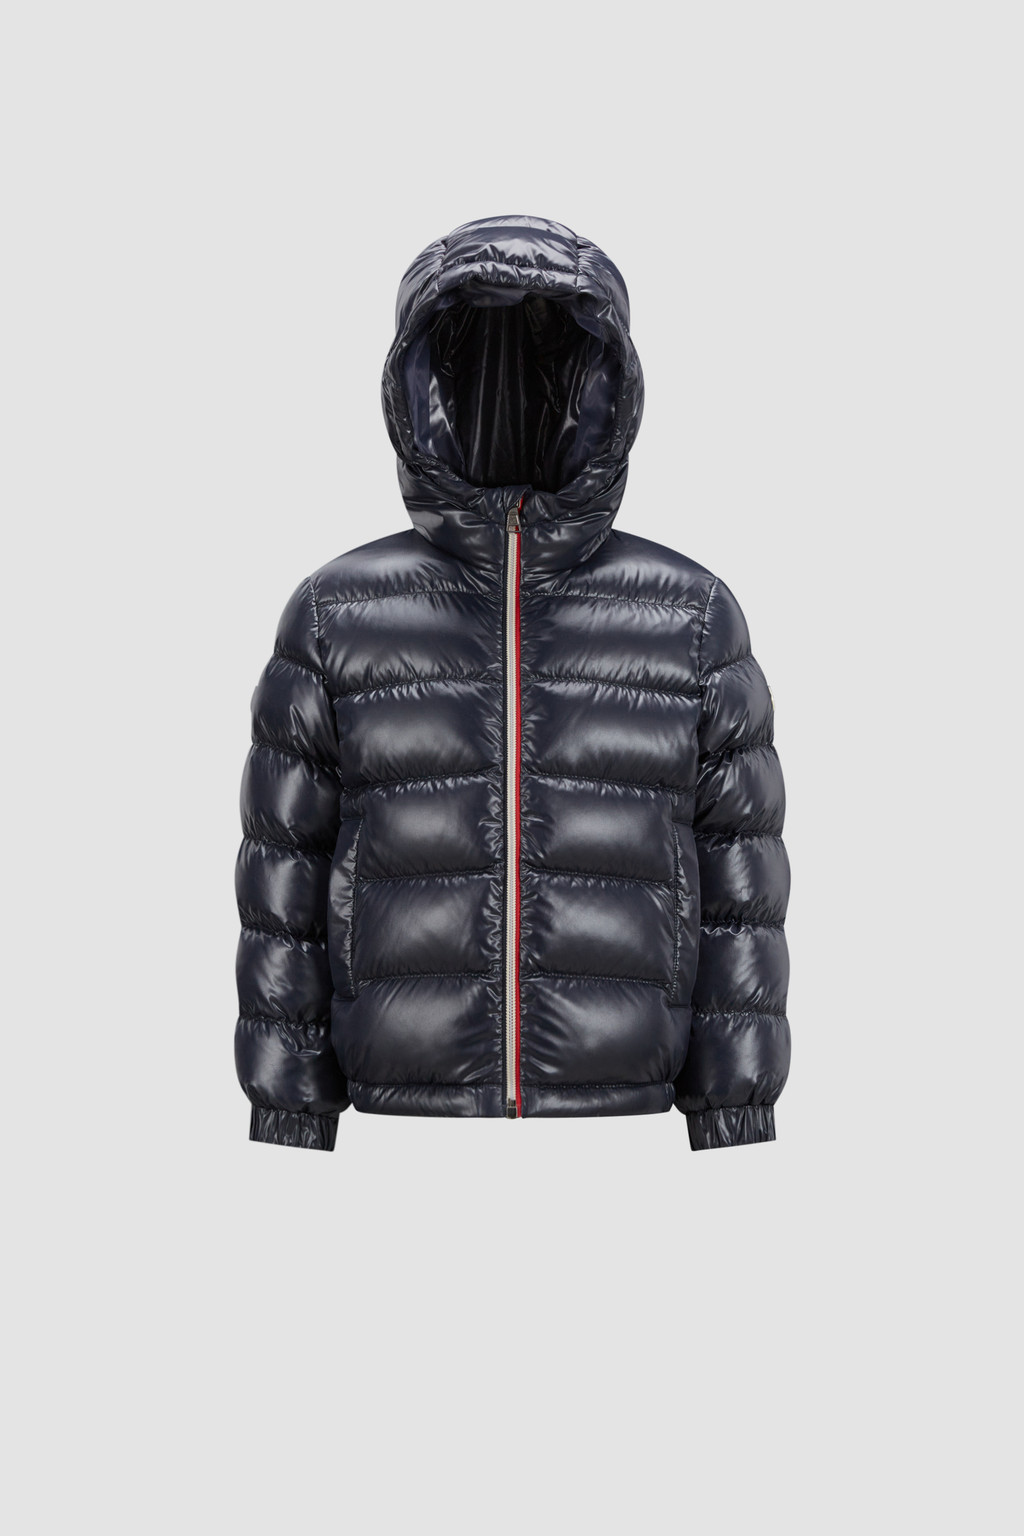 Boys' Clothes, Jackets and Accessories | Moncler NO